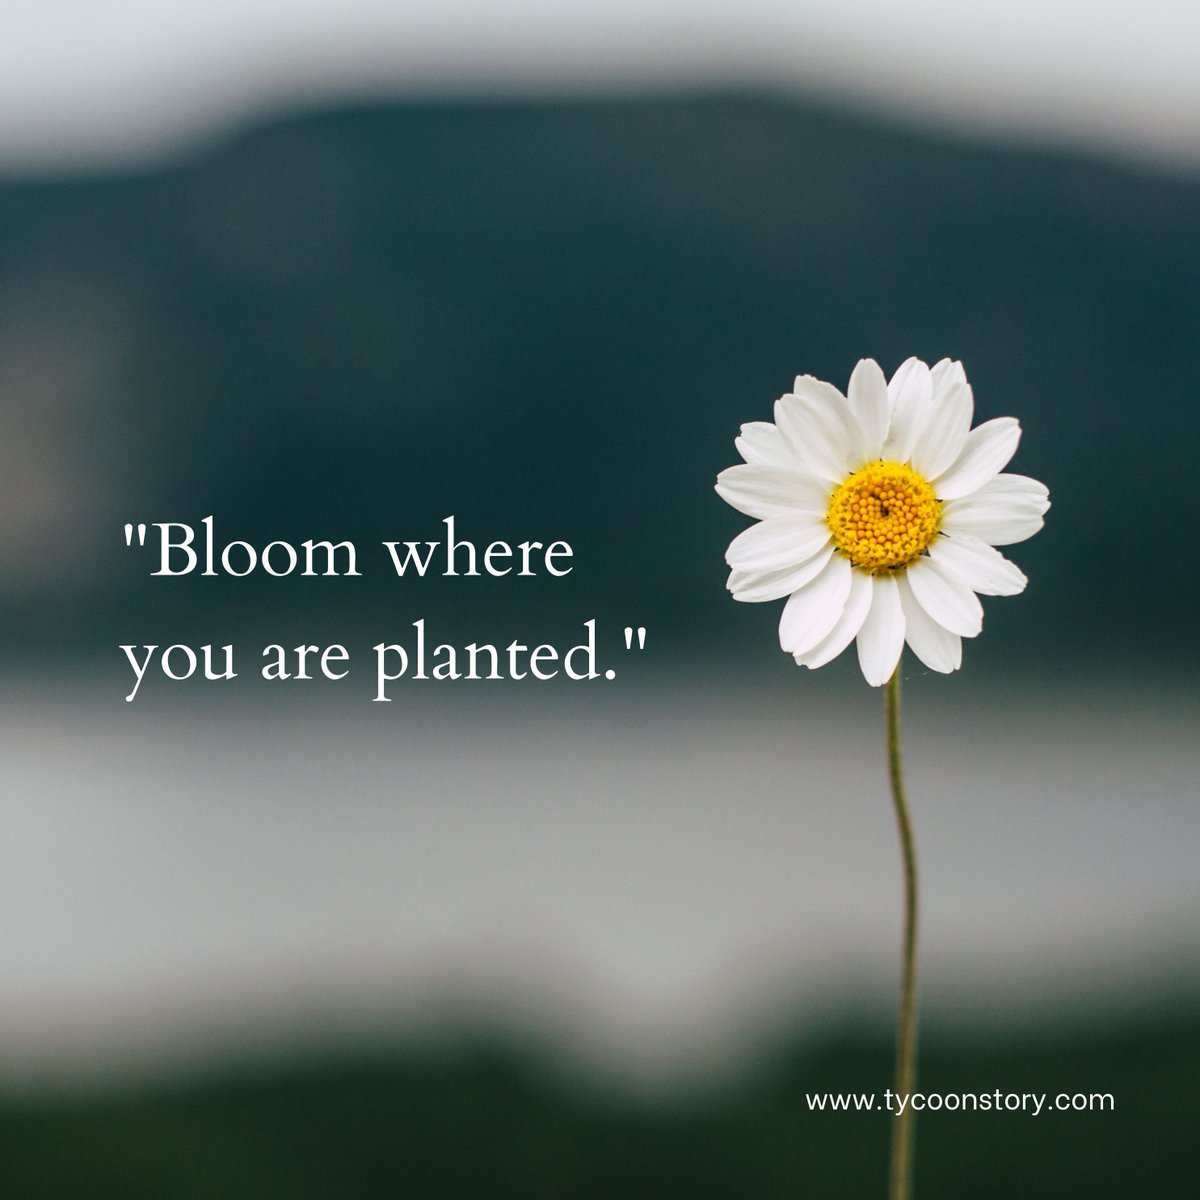 Flourish In The Environment Where You've Been Placed.

#Environmental #plantlife #thriving #blooming #MaximizePotential #makeitgrow #cultivate #growingup #flourishing #idealsituations #embracinglife #positiveimpact #challenges